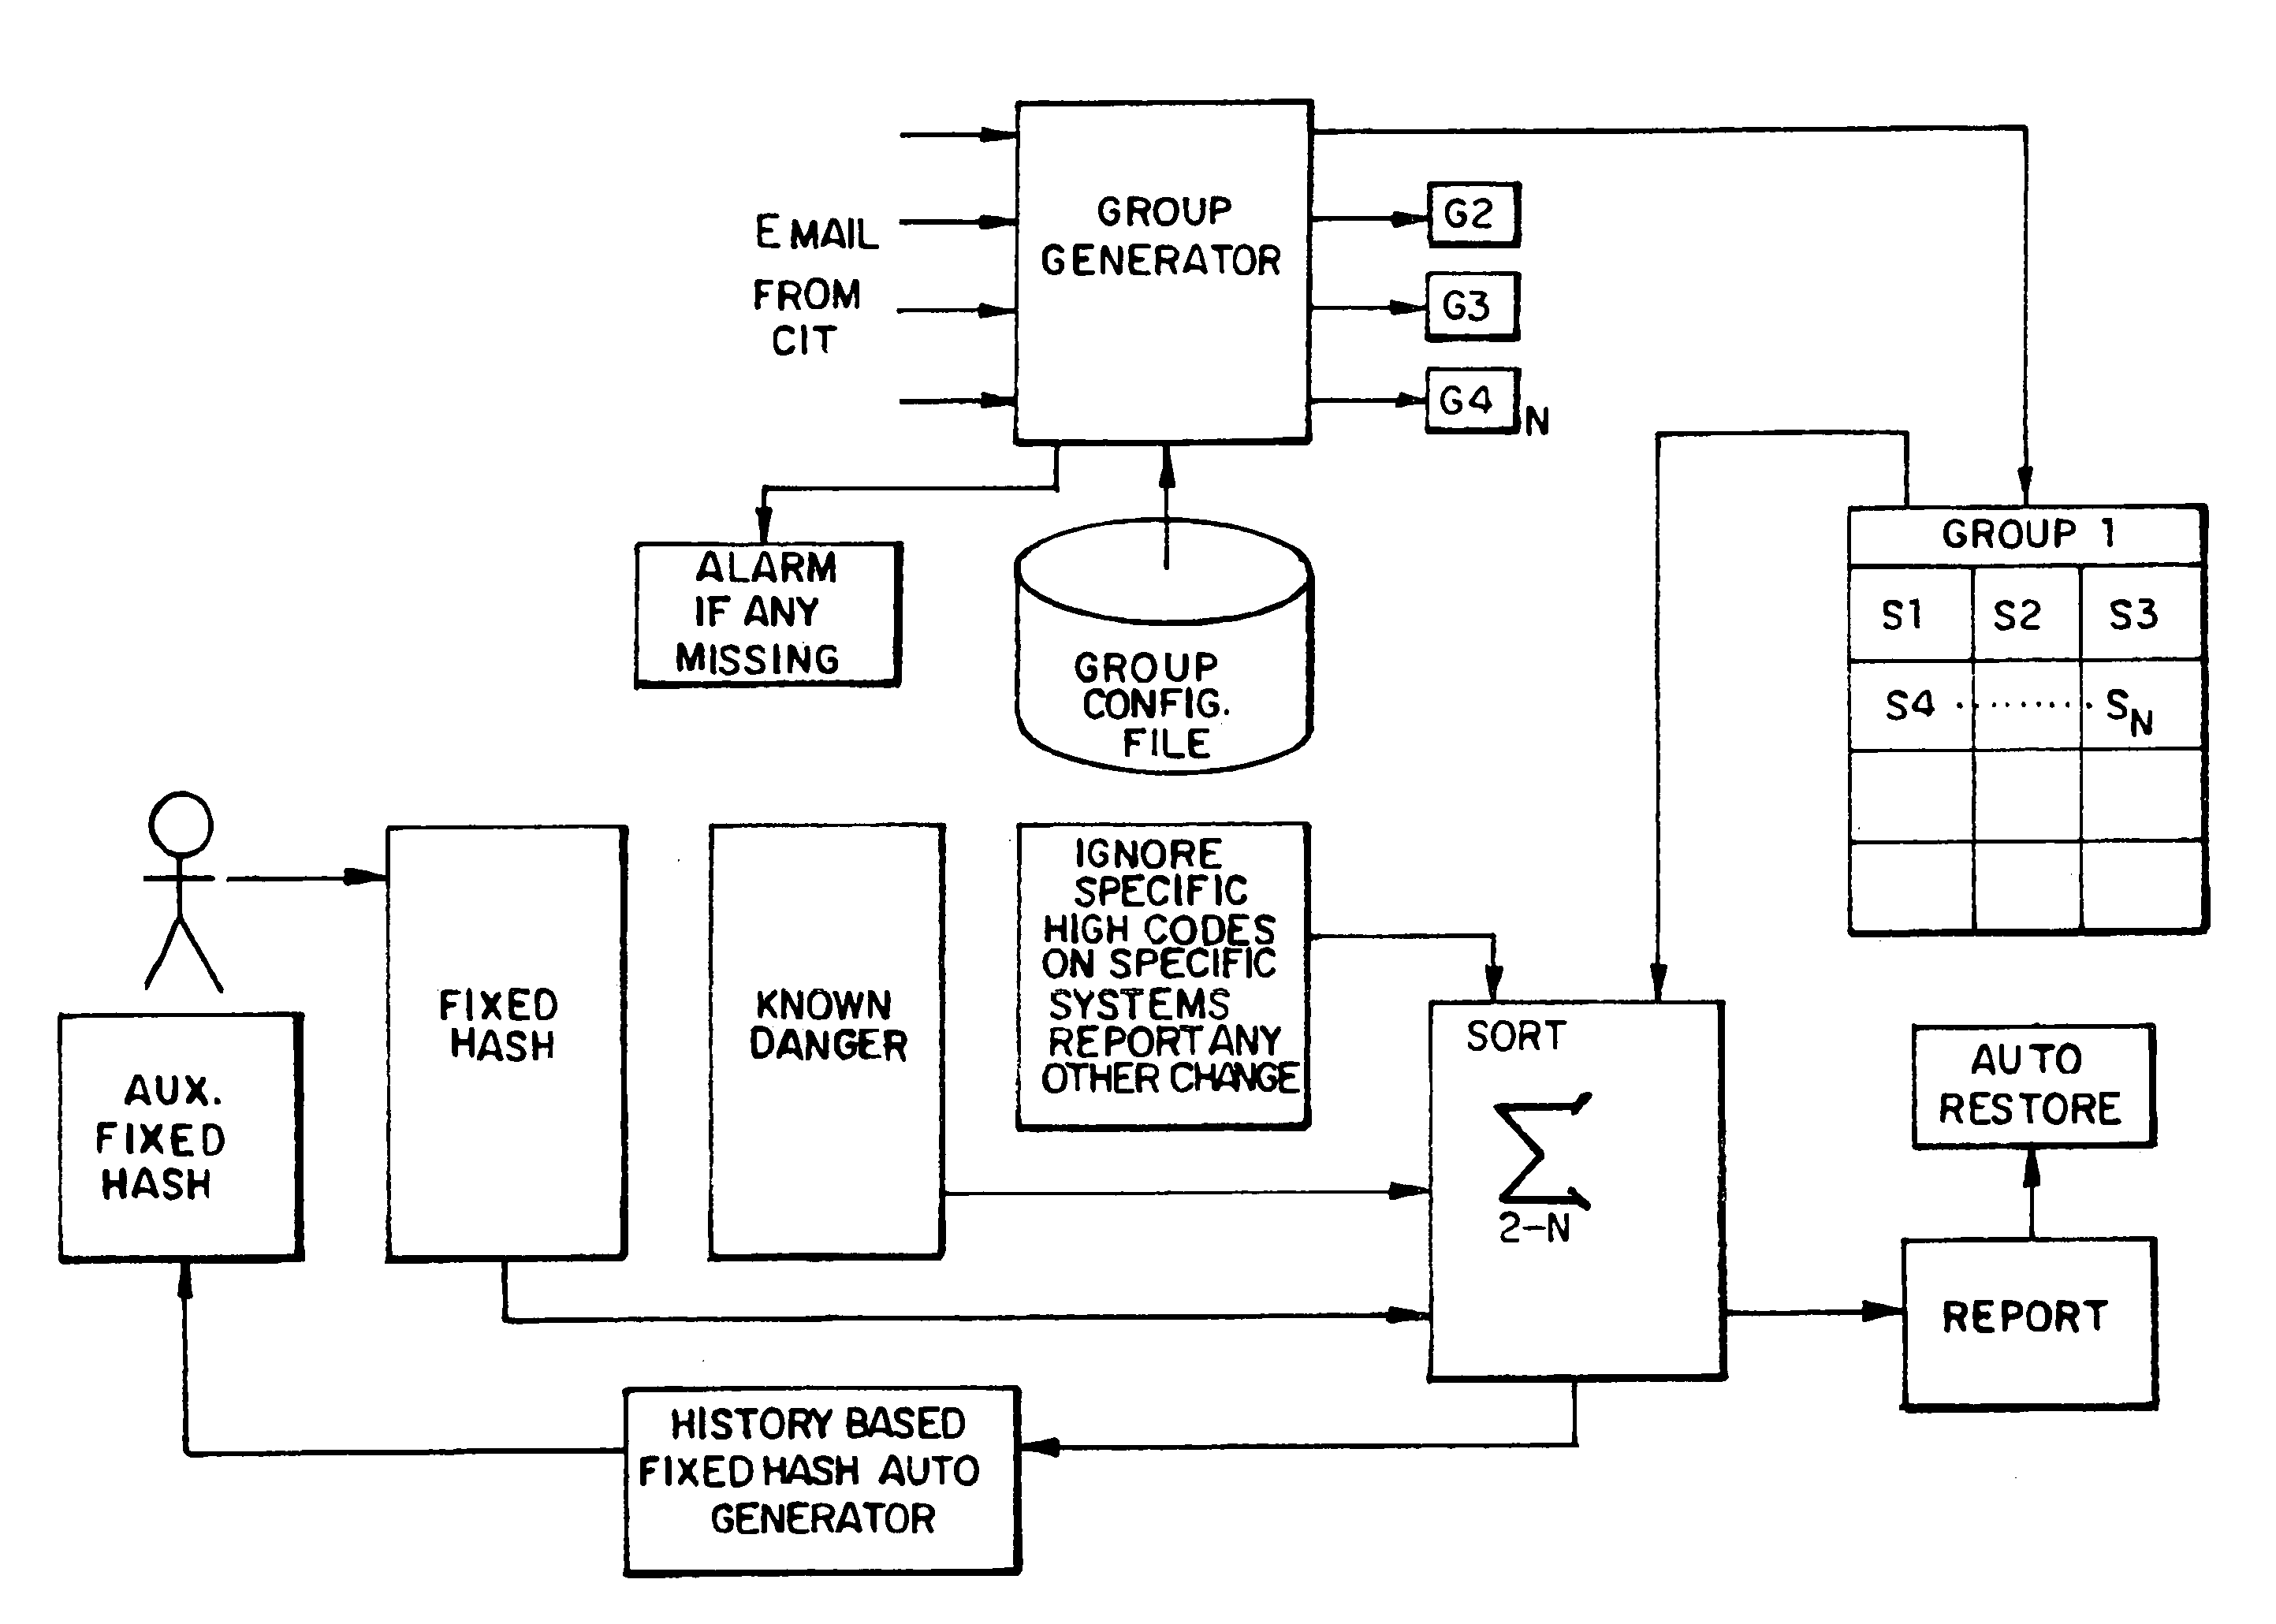 Apparatus, methods and articles of manufacture for securing computer networks